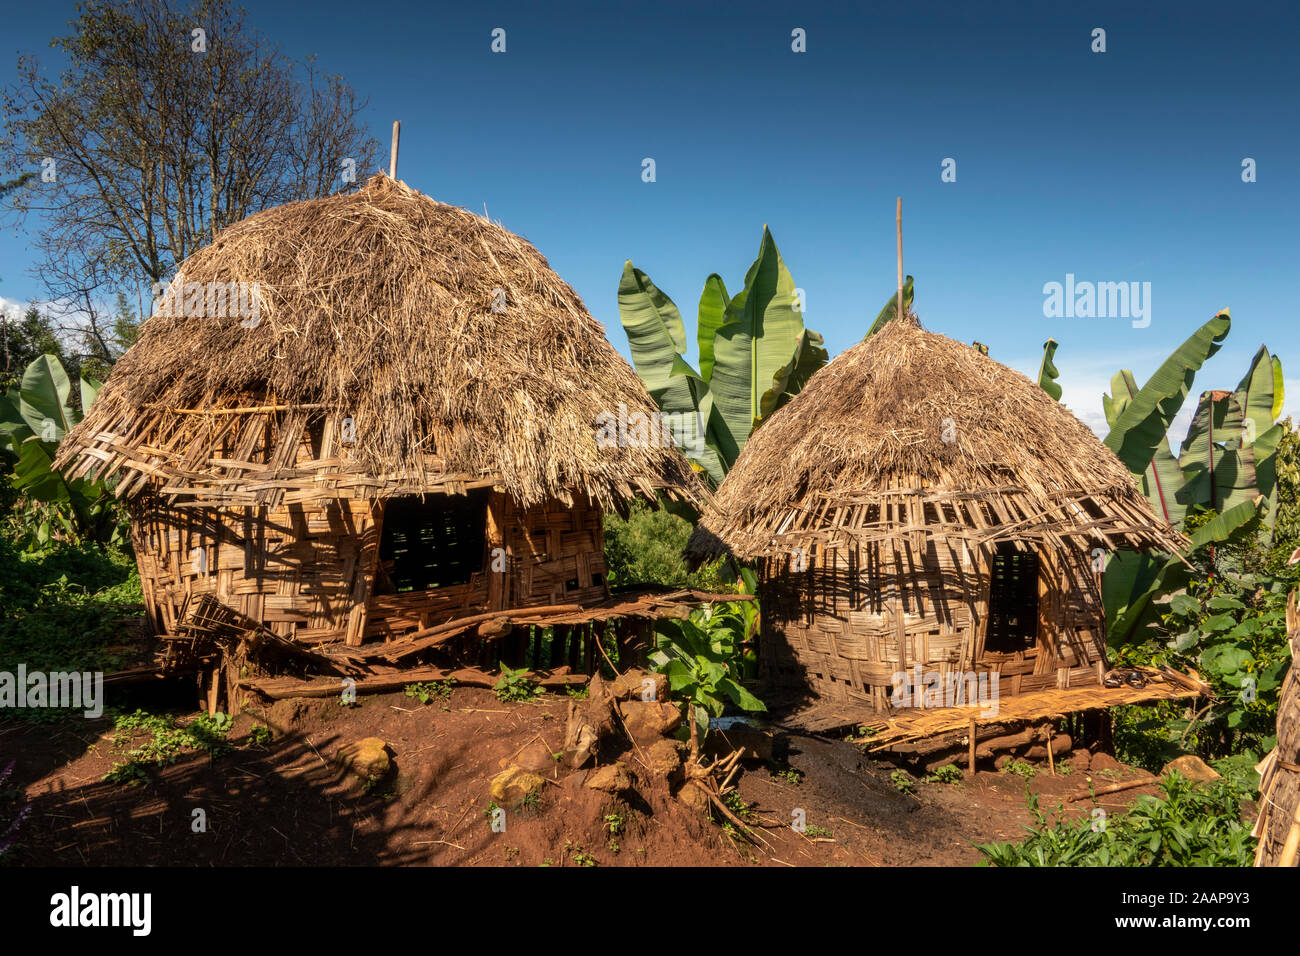 Ethiopia, Rift Valley, Gamo Gofo Omo, Arba Minch, Dorze village, traditional round store houses with woven sides and thatched roof Stock Photo